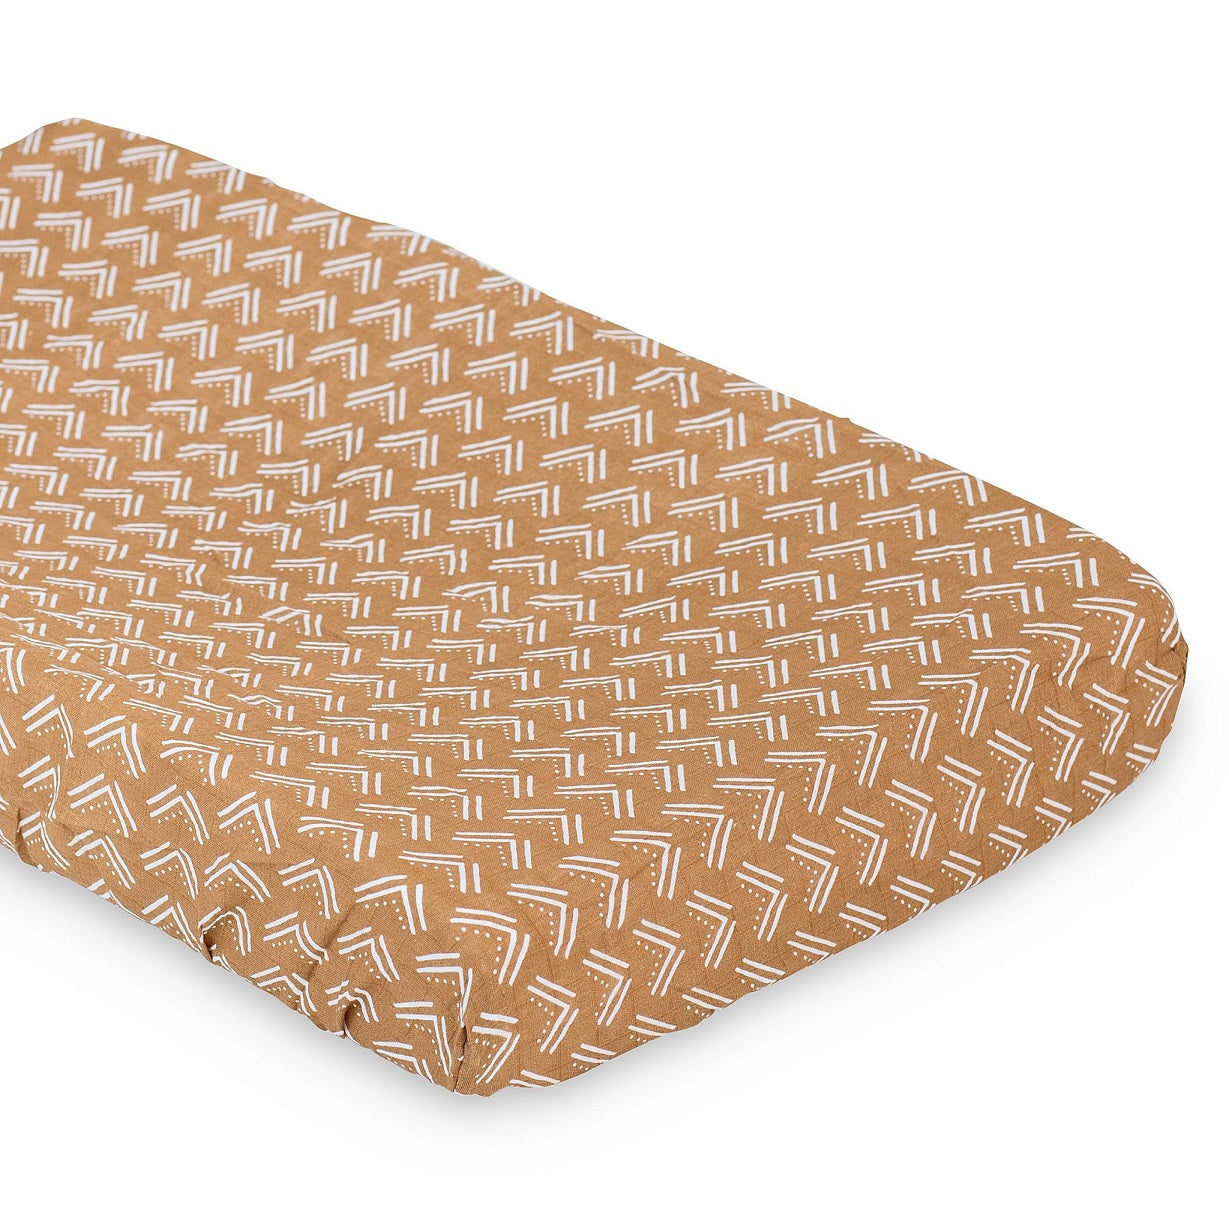 Lulujo Mudcloth Changing Pad Cover